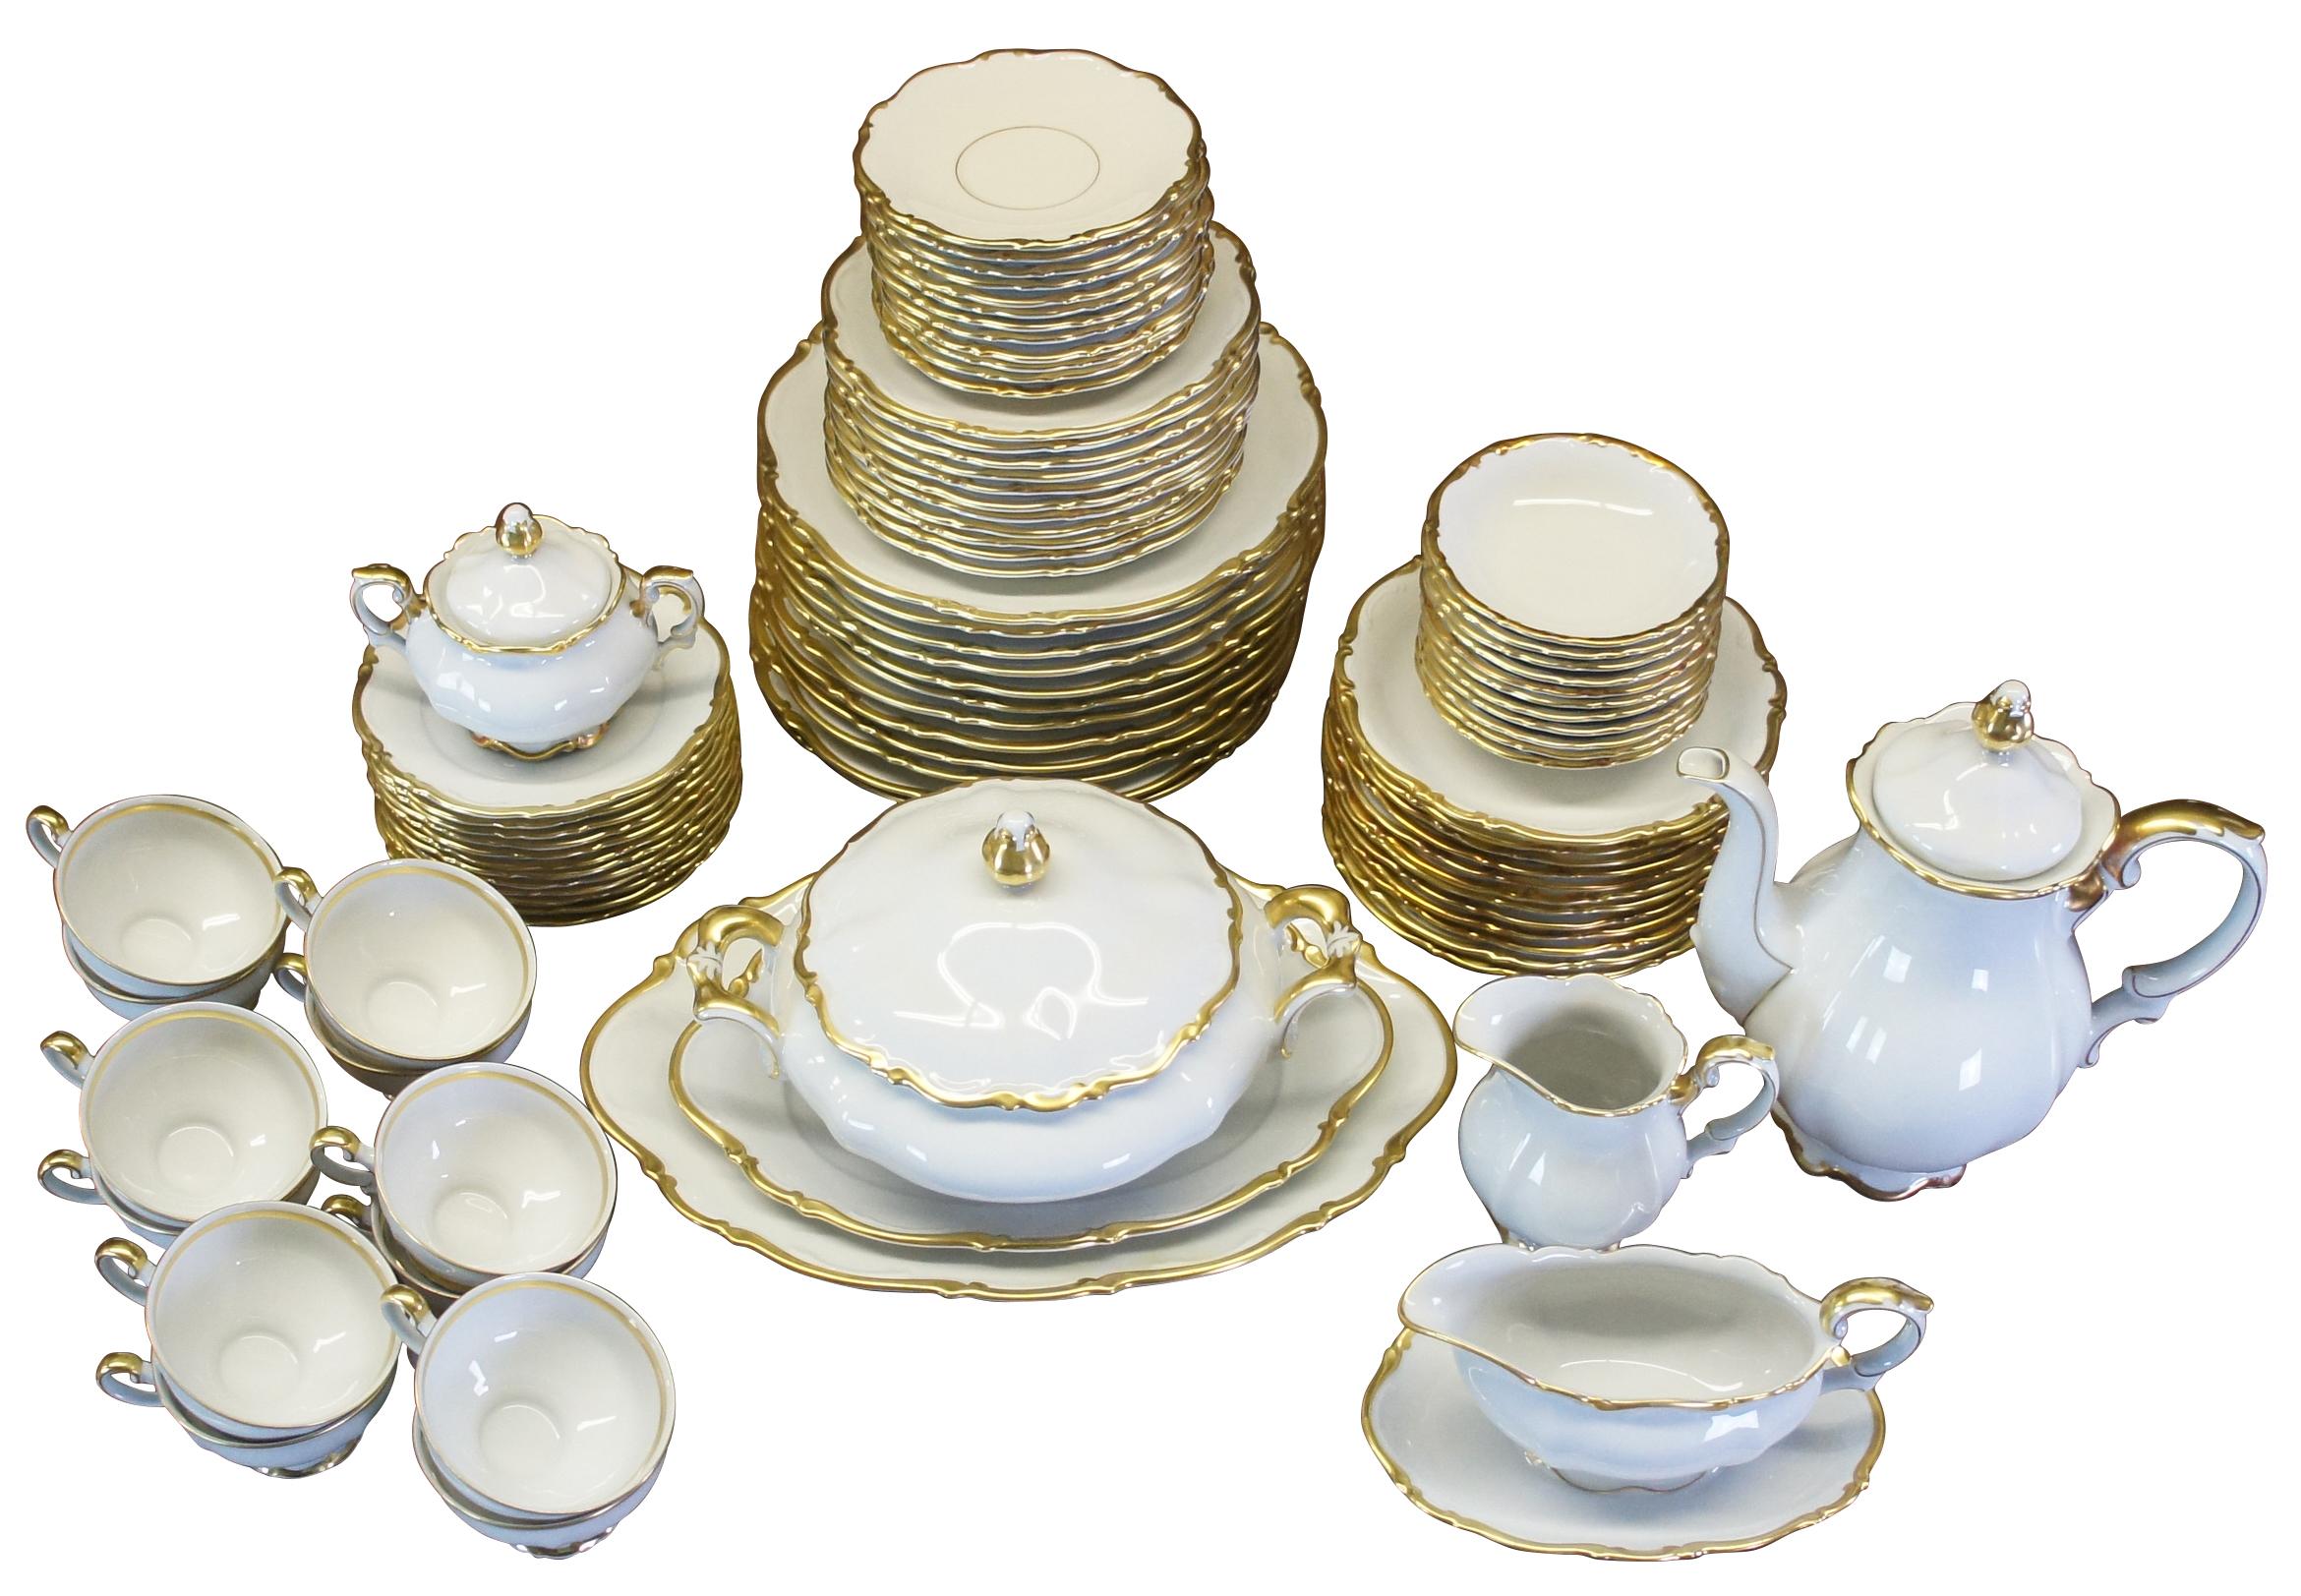 Vintage Mitterteich Bavaria Golden Lark china, tea and coffee dinner set featuring serpentine design with a classic white with gold pattern rim. Pattern 1507. Germany.

